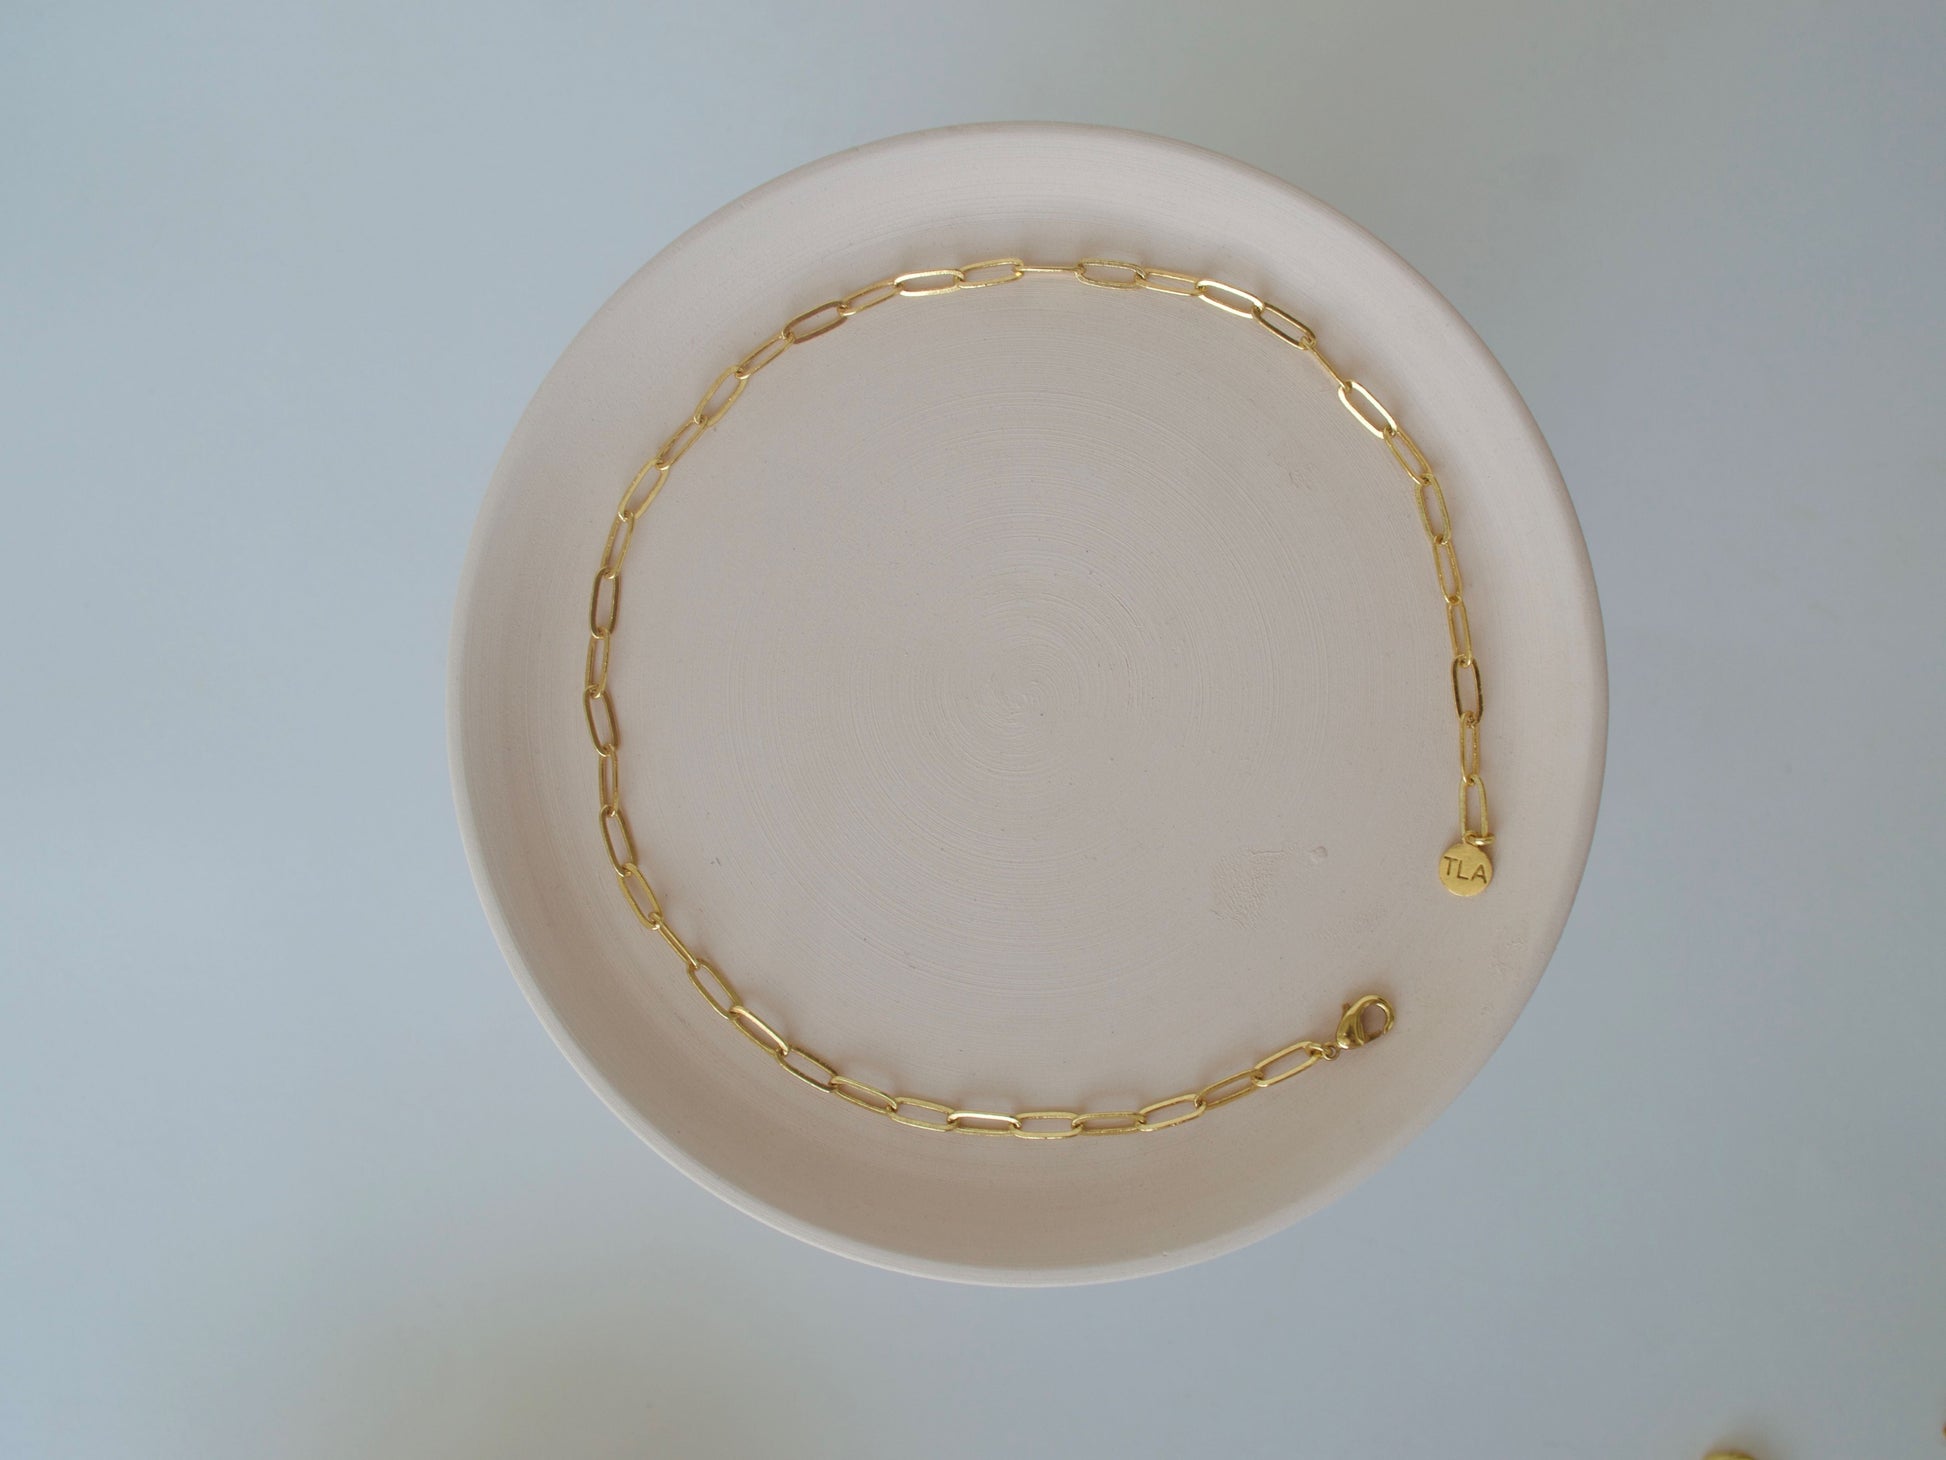 Gold Brass Linked Necklaces at Kamakhyaa by The Loom Art. This item is Brass, Cosmic Dream TLA, Fashion Jewellery, Free Size, Gold, Gold Plated, jewelry, Less than $50, Natural, Necklaces, Products less than $25